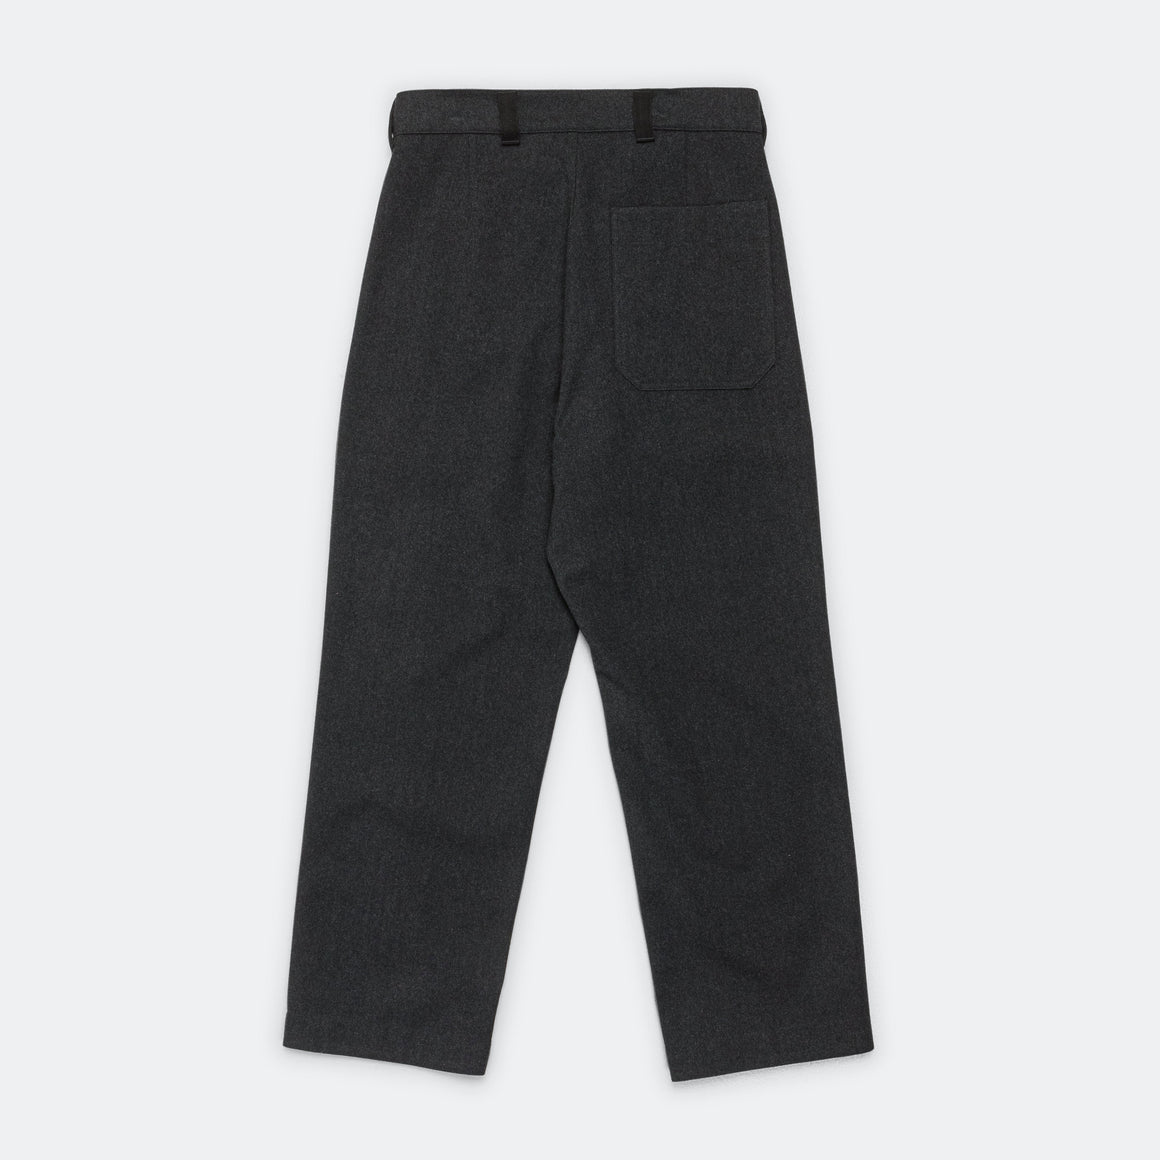 MHL. - Firemans Trouser - Charcoal Wool Cotton Drill - UP THERE